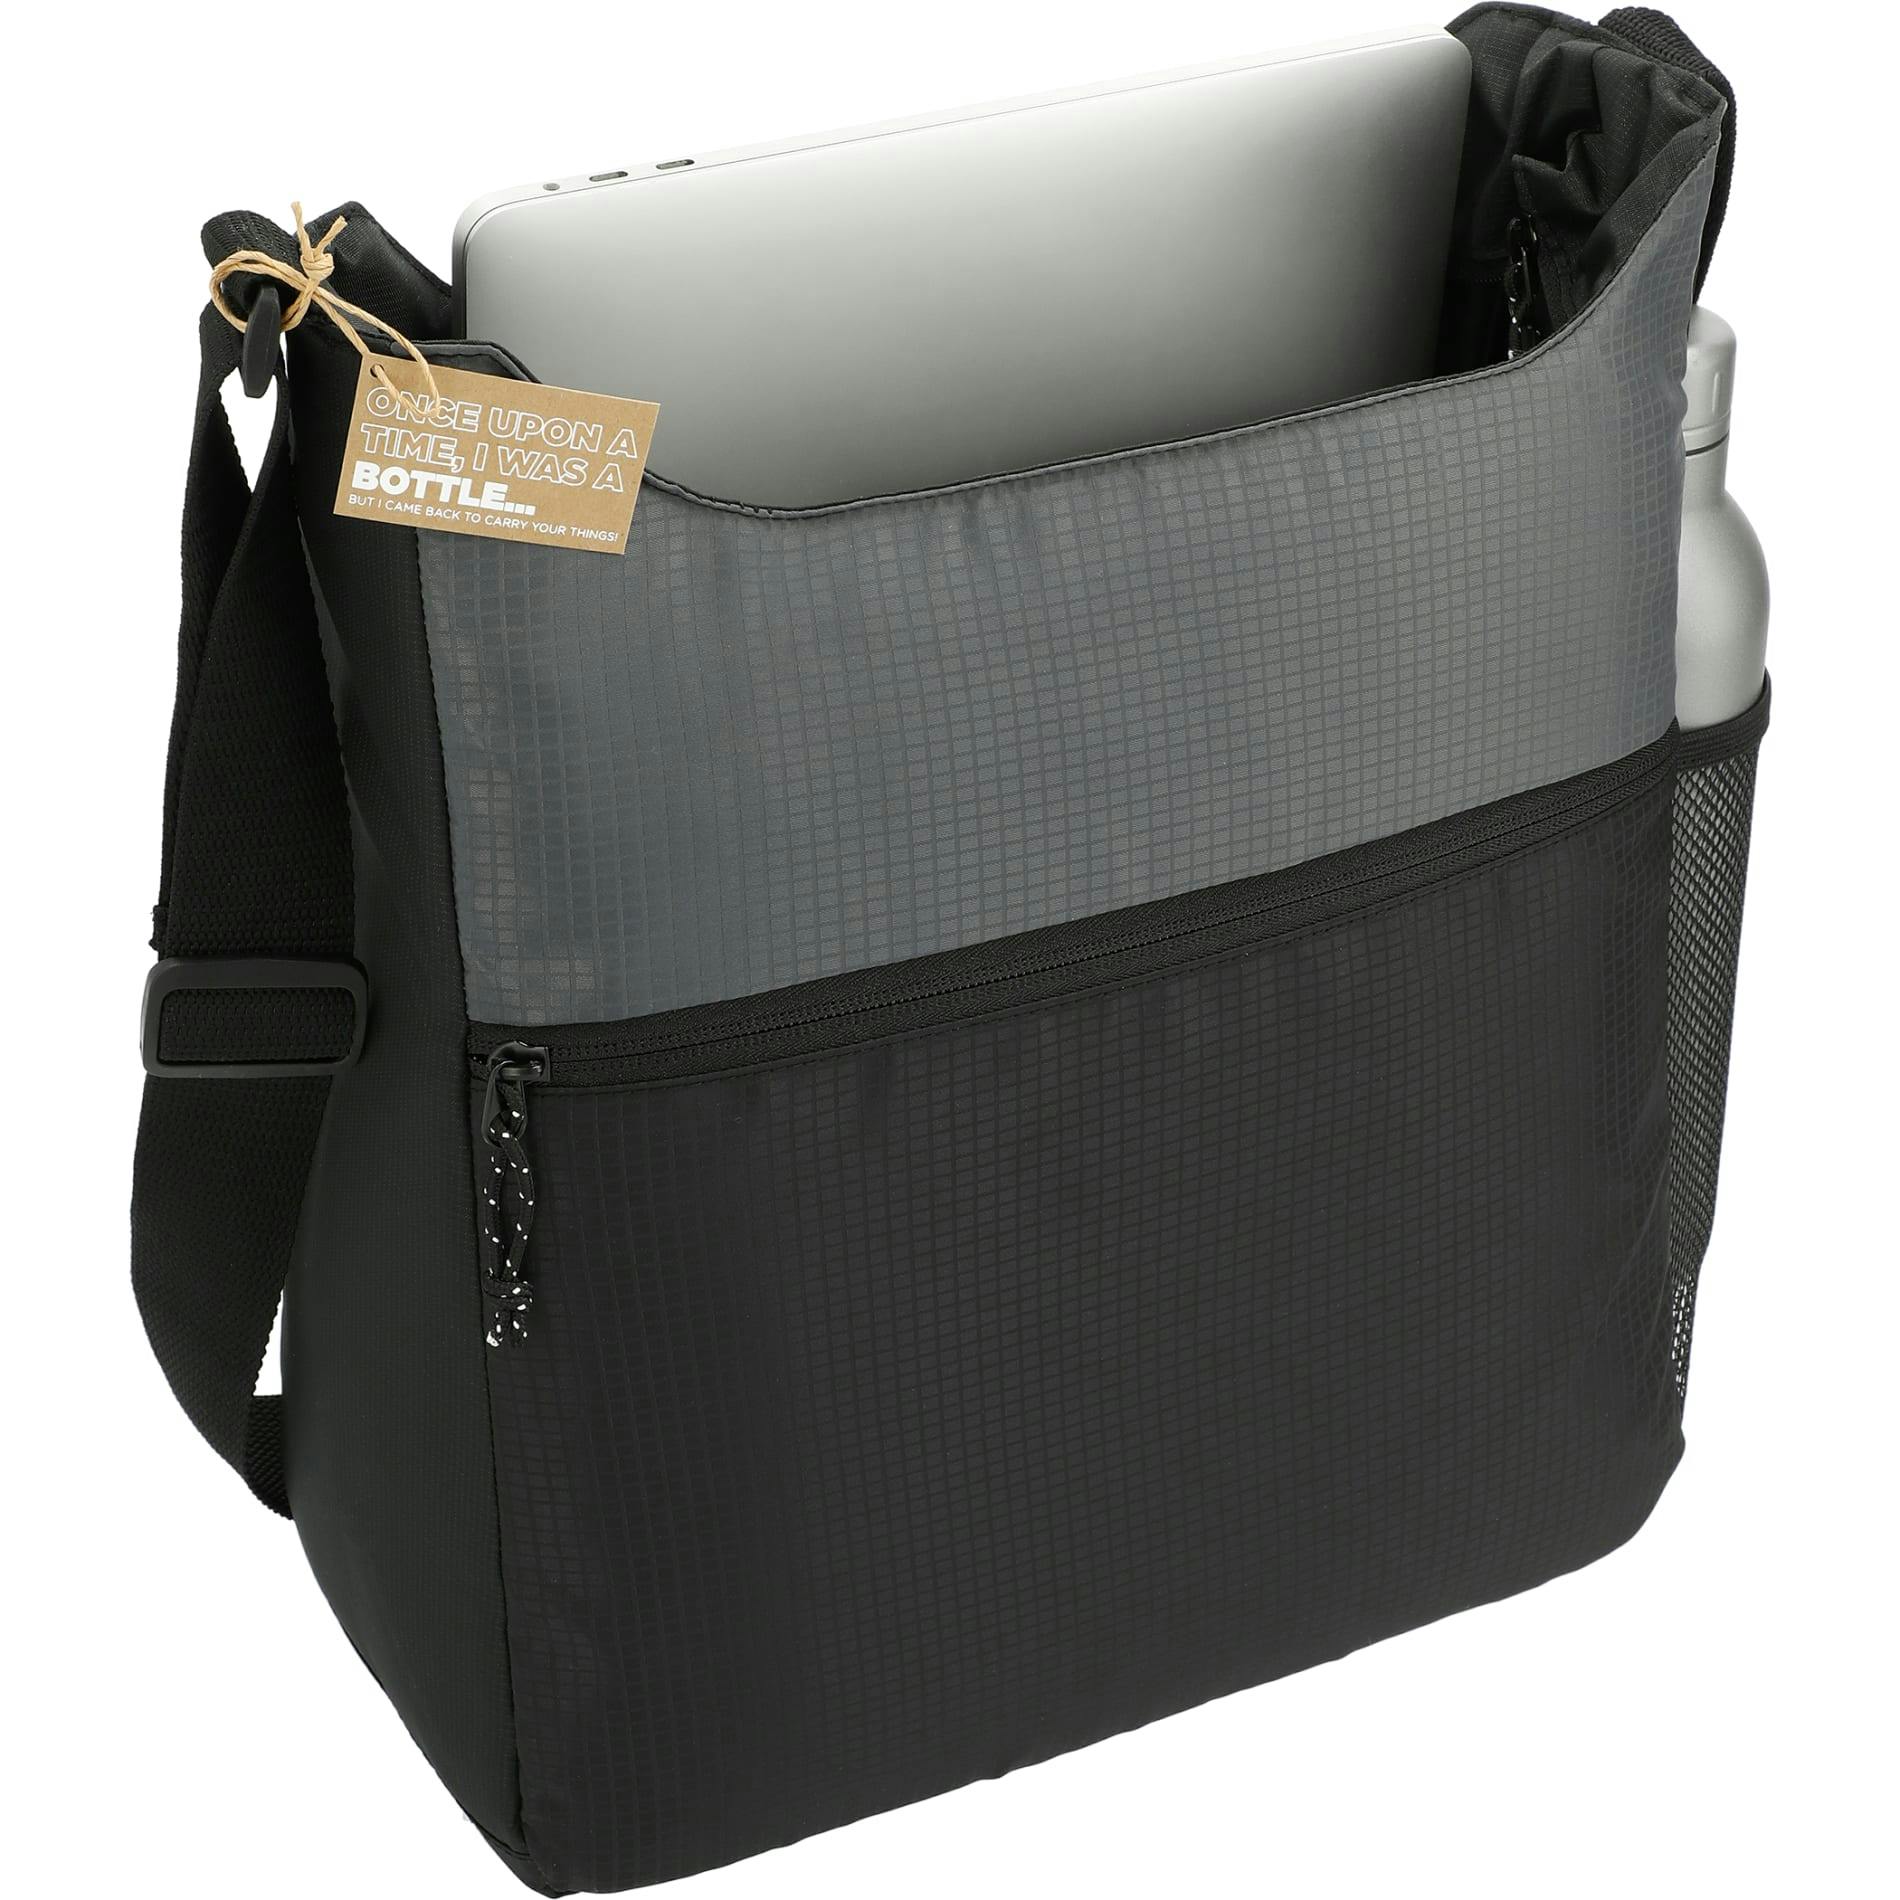 NBN Trailhead Recycled Zippered Tote - additional Image 2